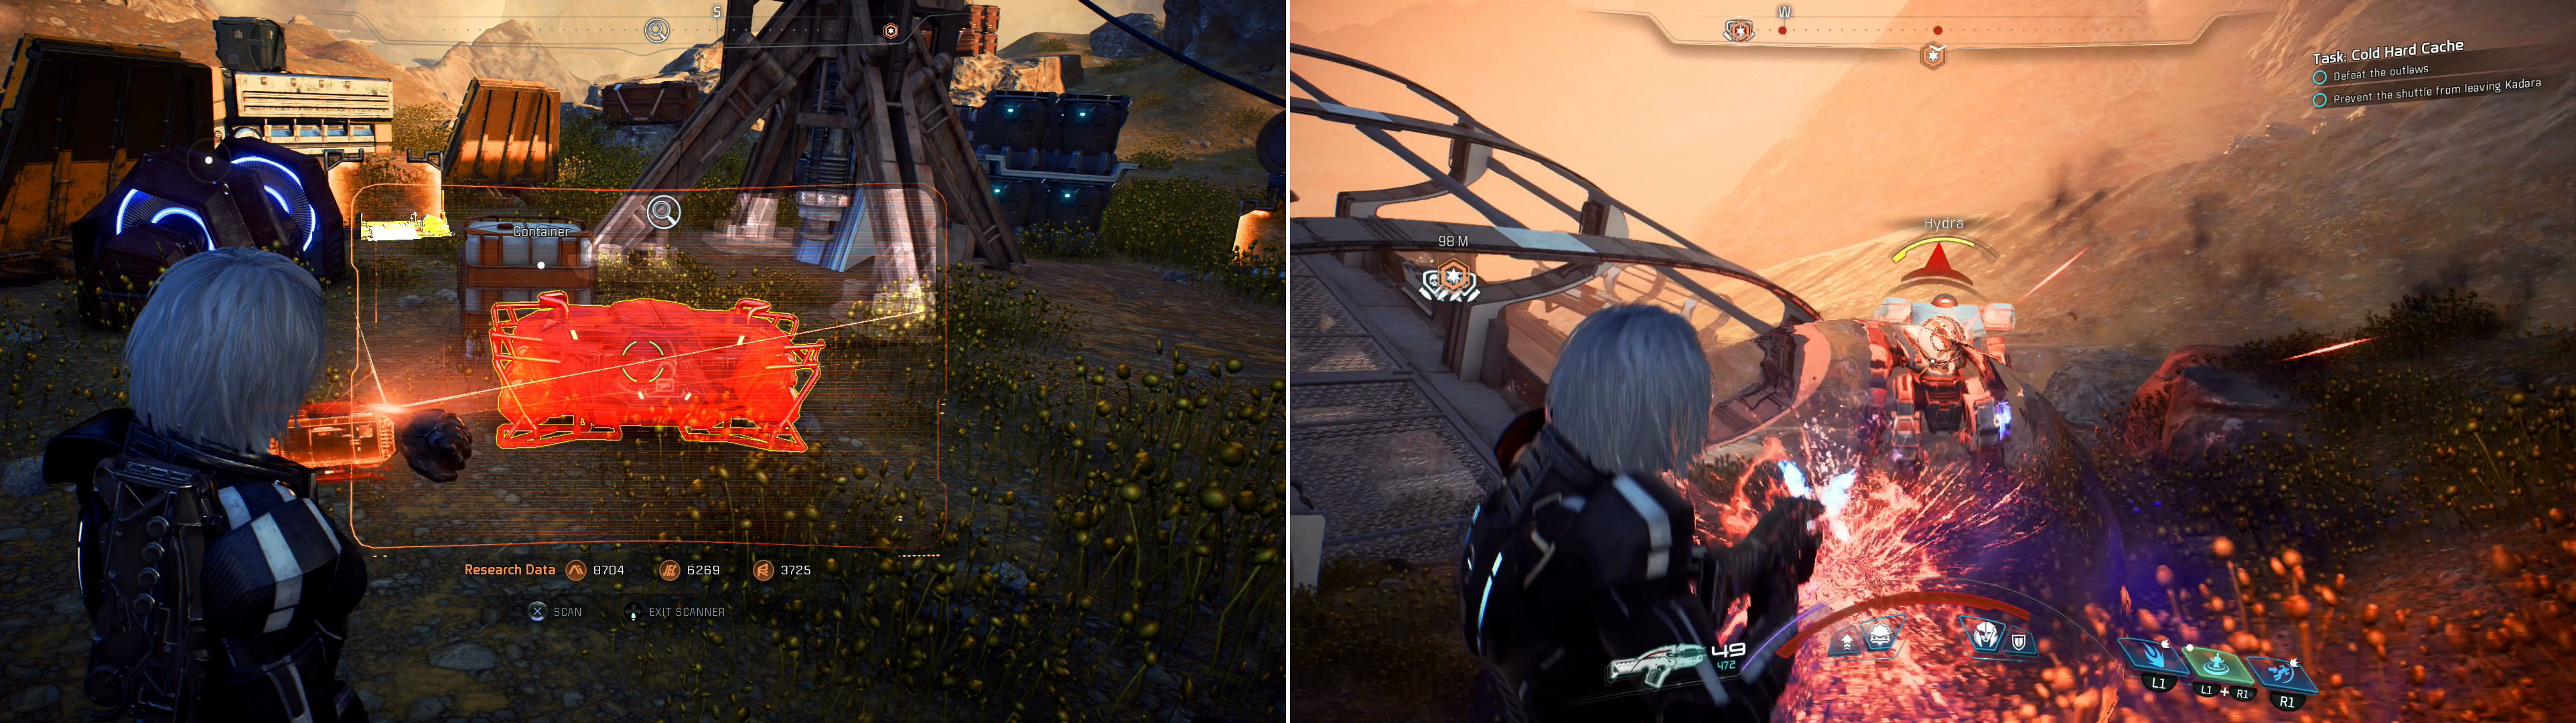 Scan Weapons Caches at various outlaw camps across Kadara (left), then head to the enemy base and defeat your foes there, which include two Hydra mechs (right).